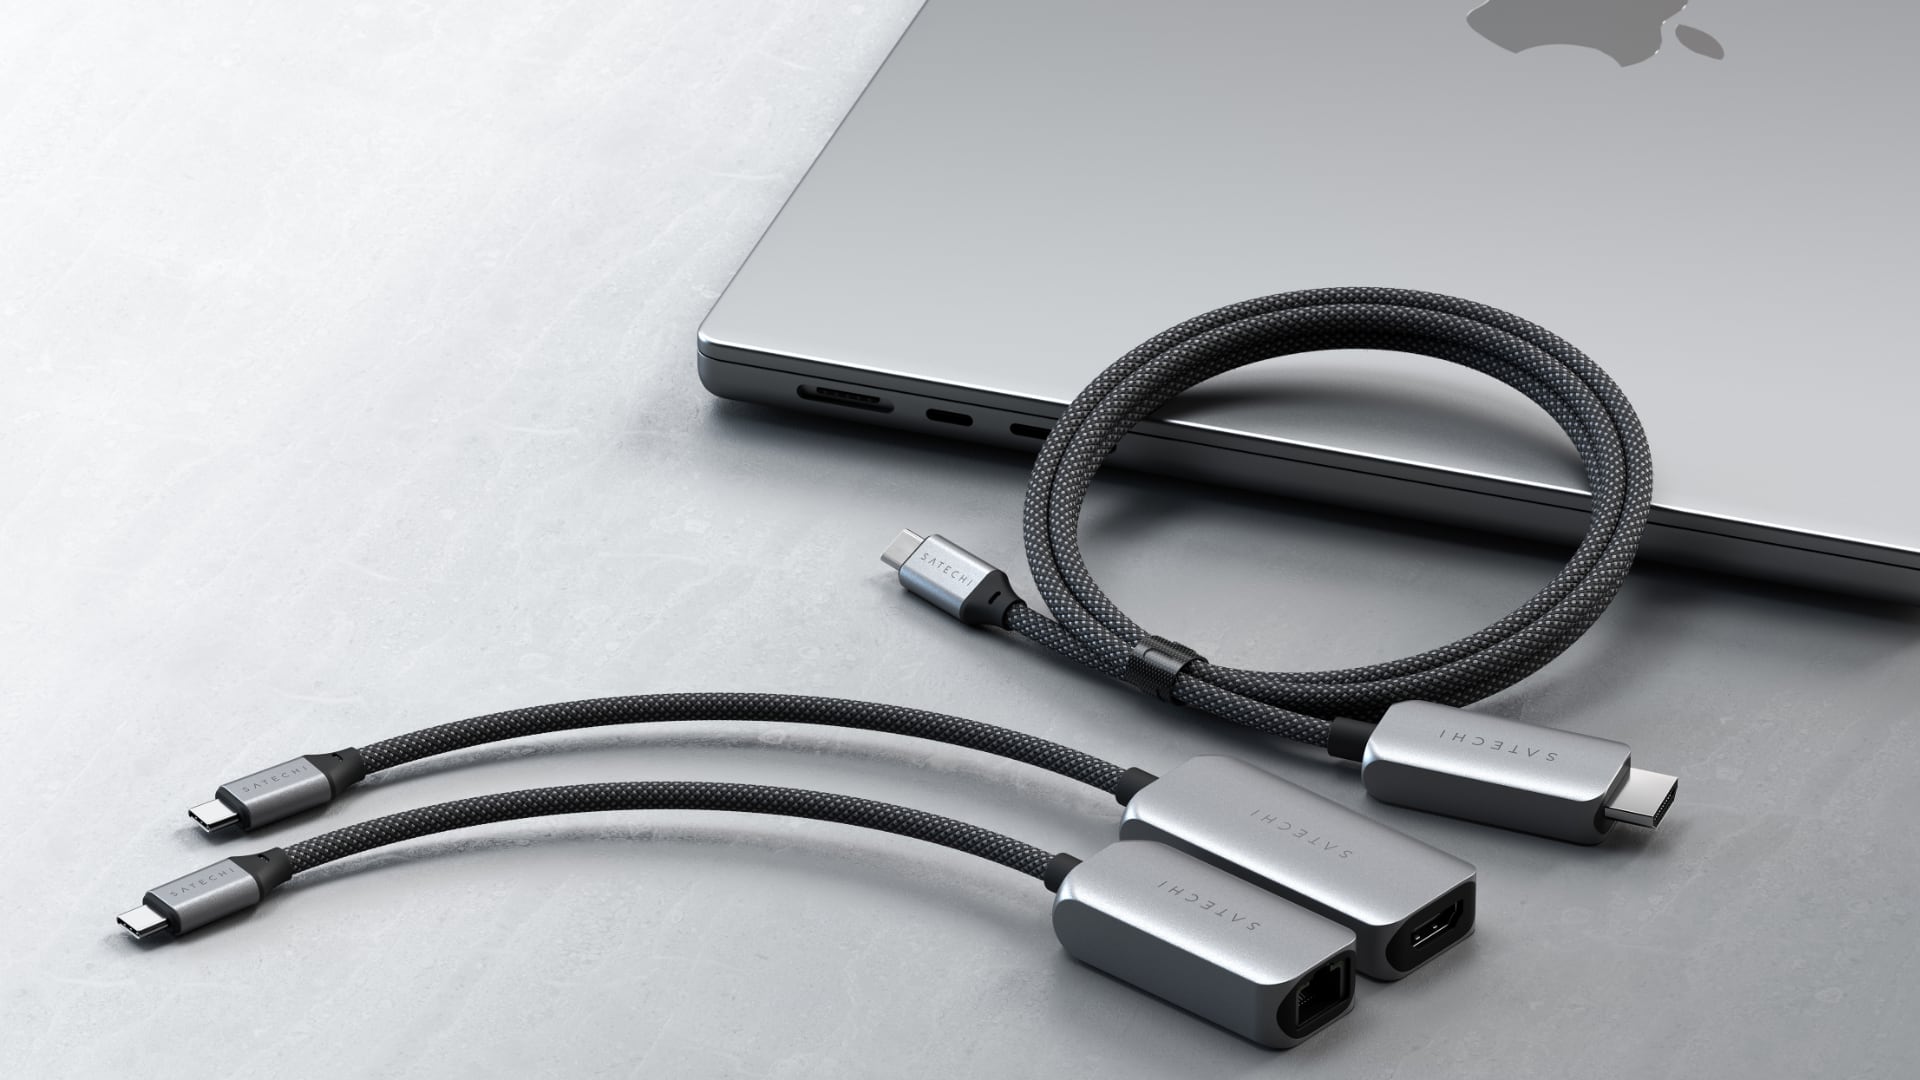 Satechi's 2.5 Gigabit Ethernet adapter, USB-C to HDMI adapter and USB-C to HDMI cable